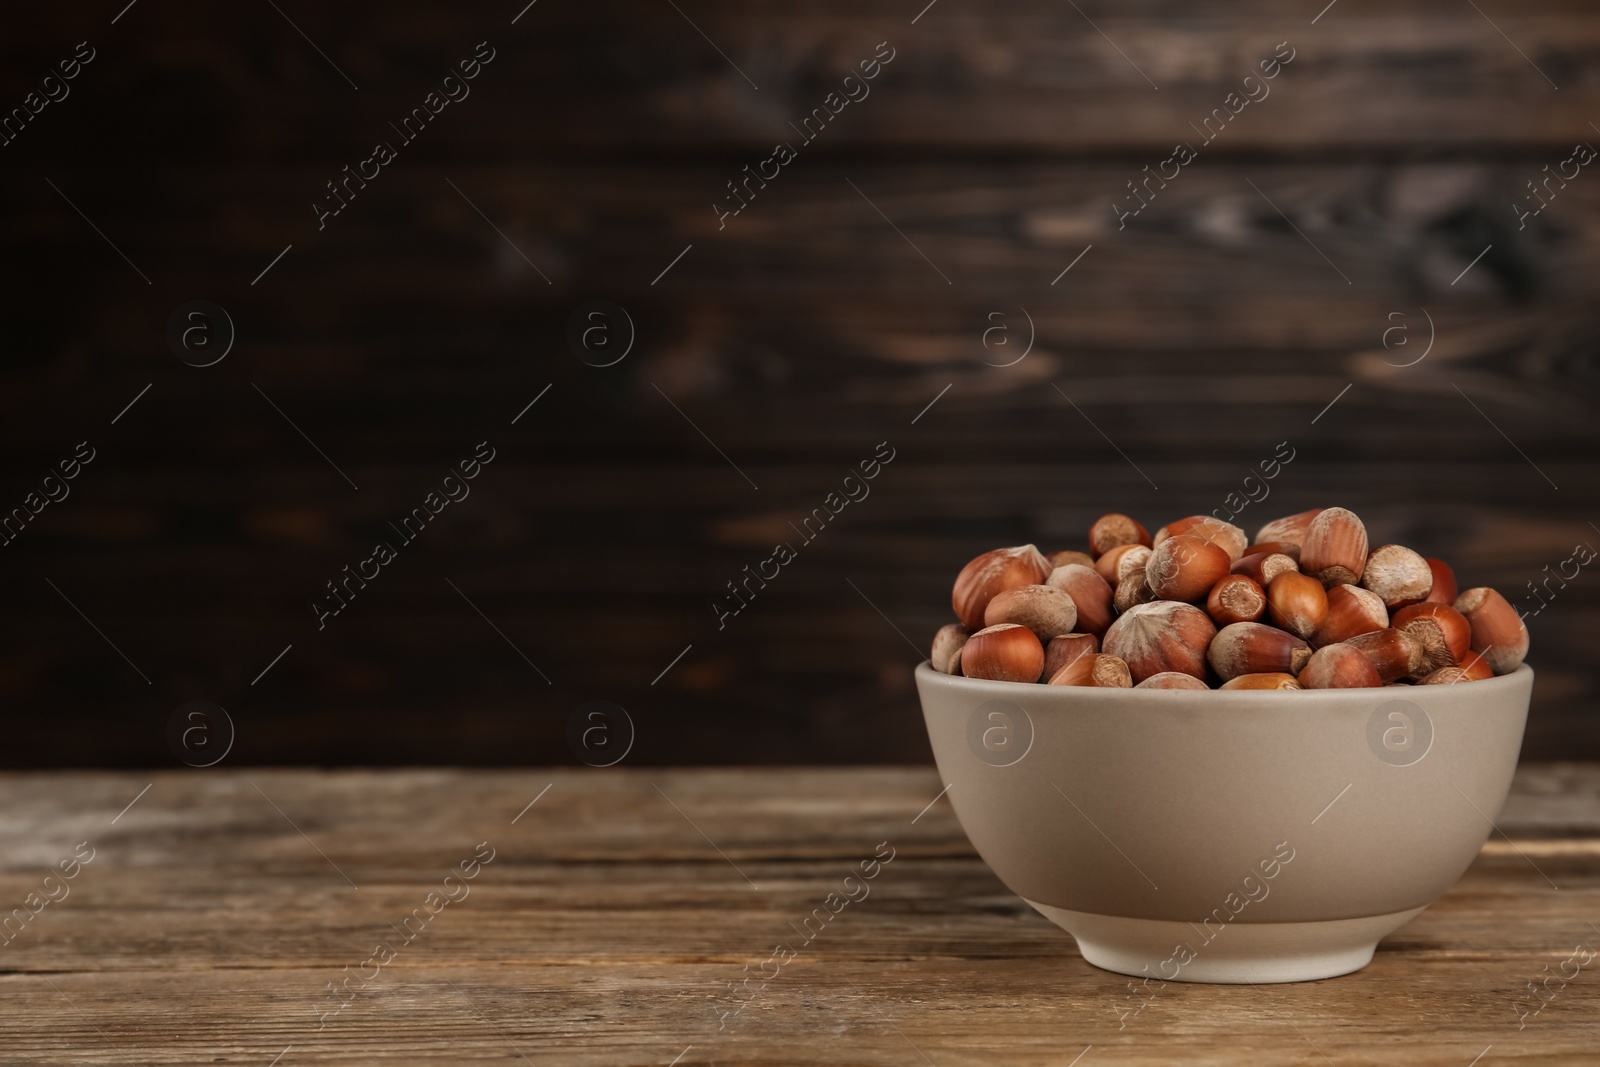 Photo of Ceramic bowl with acorns on wooden table, space for text. Cooking utensil